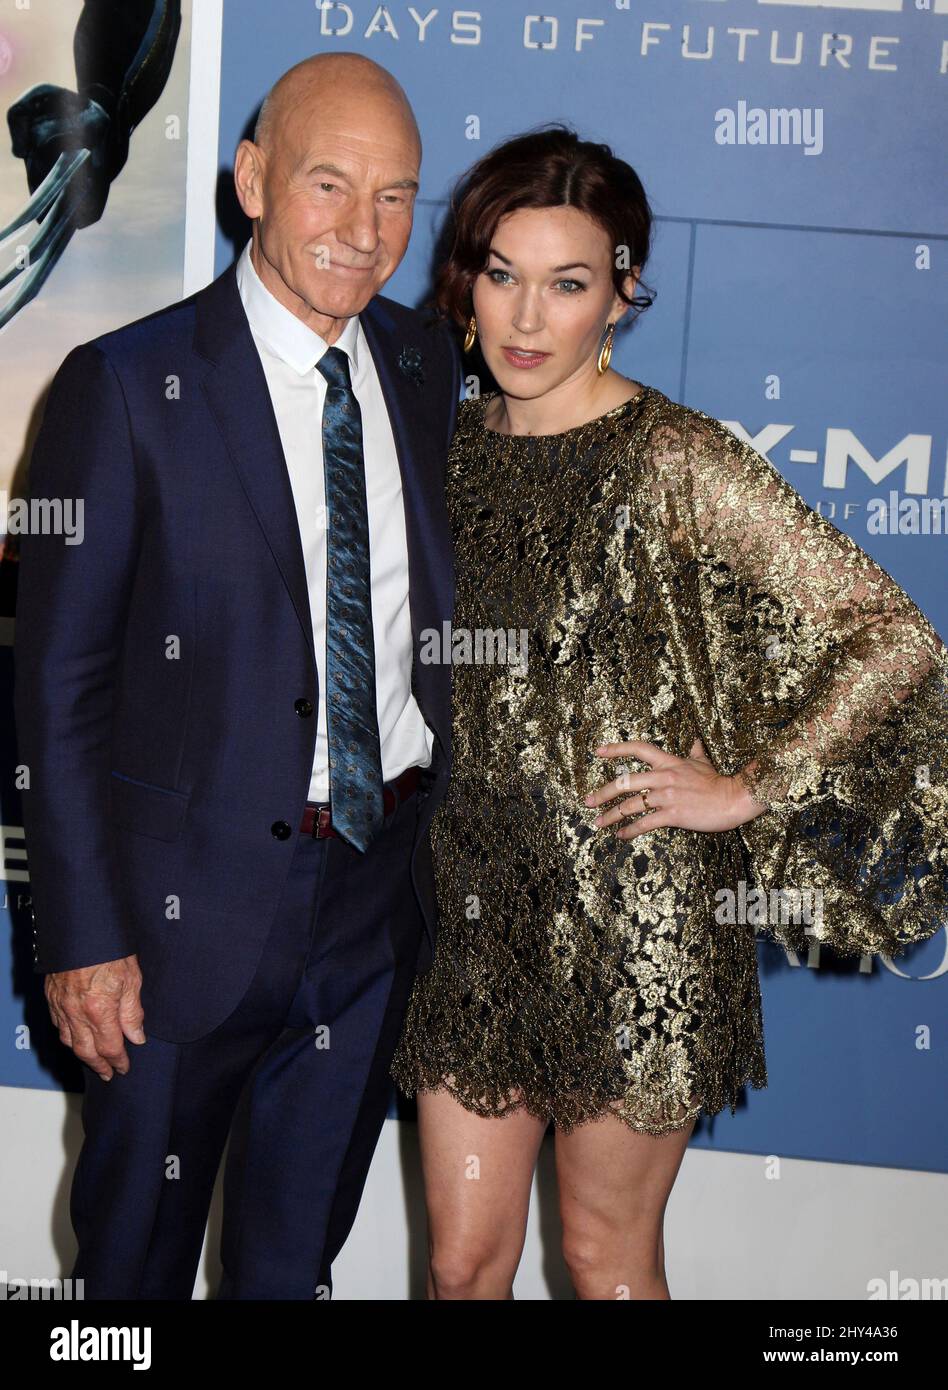 Patrick Stewart and Sophie Alexandra attending the "X-Men: Days Of Future Past" World Premiere at the Jacob Javits Center on May 10, 2014. Stock Photo